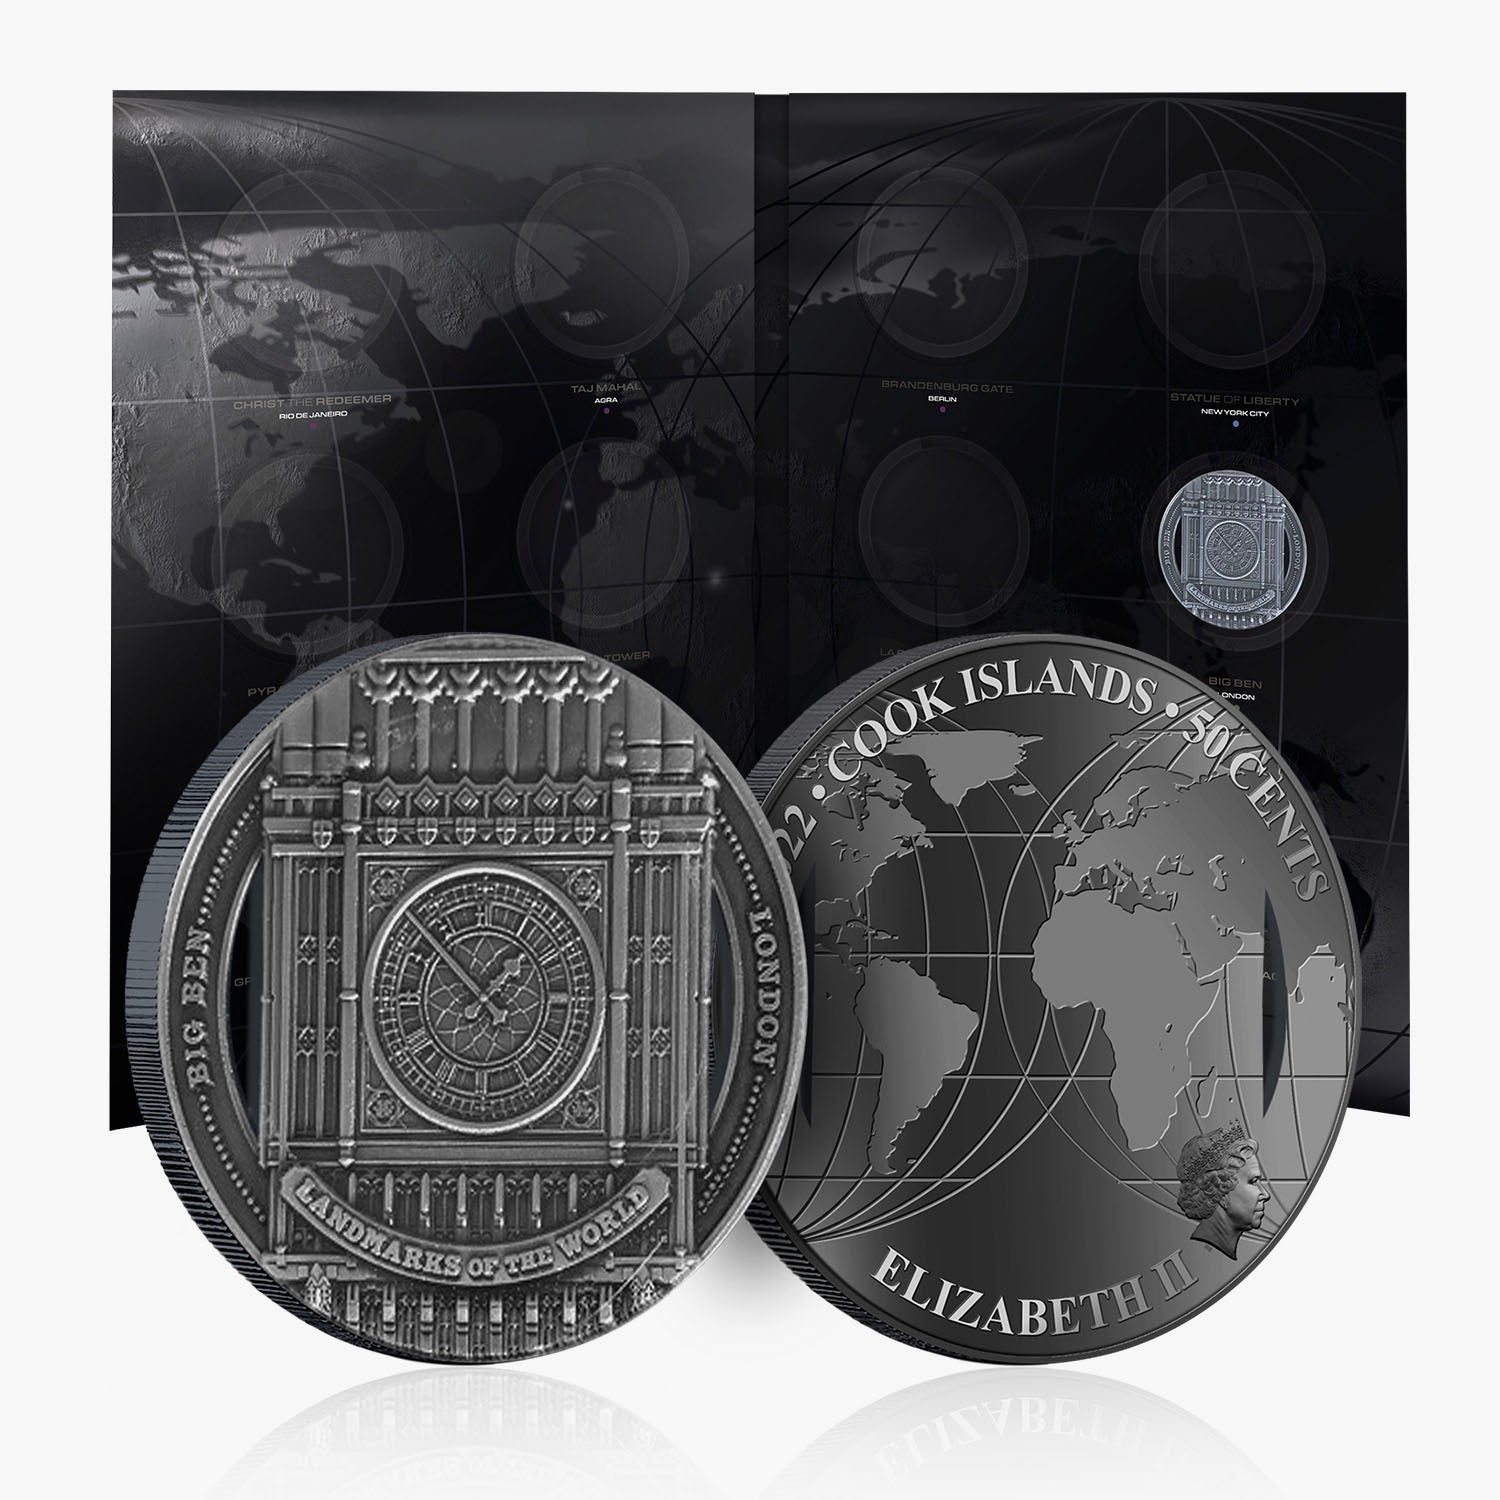 The Landmarks of the World 2022 Coin Collection